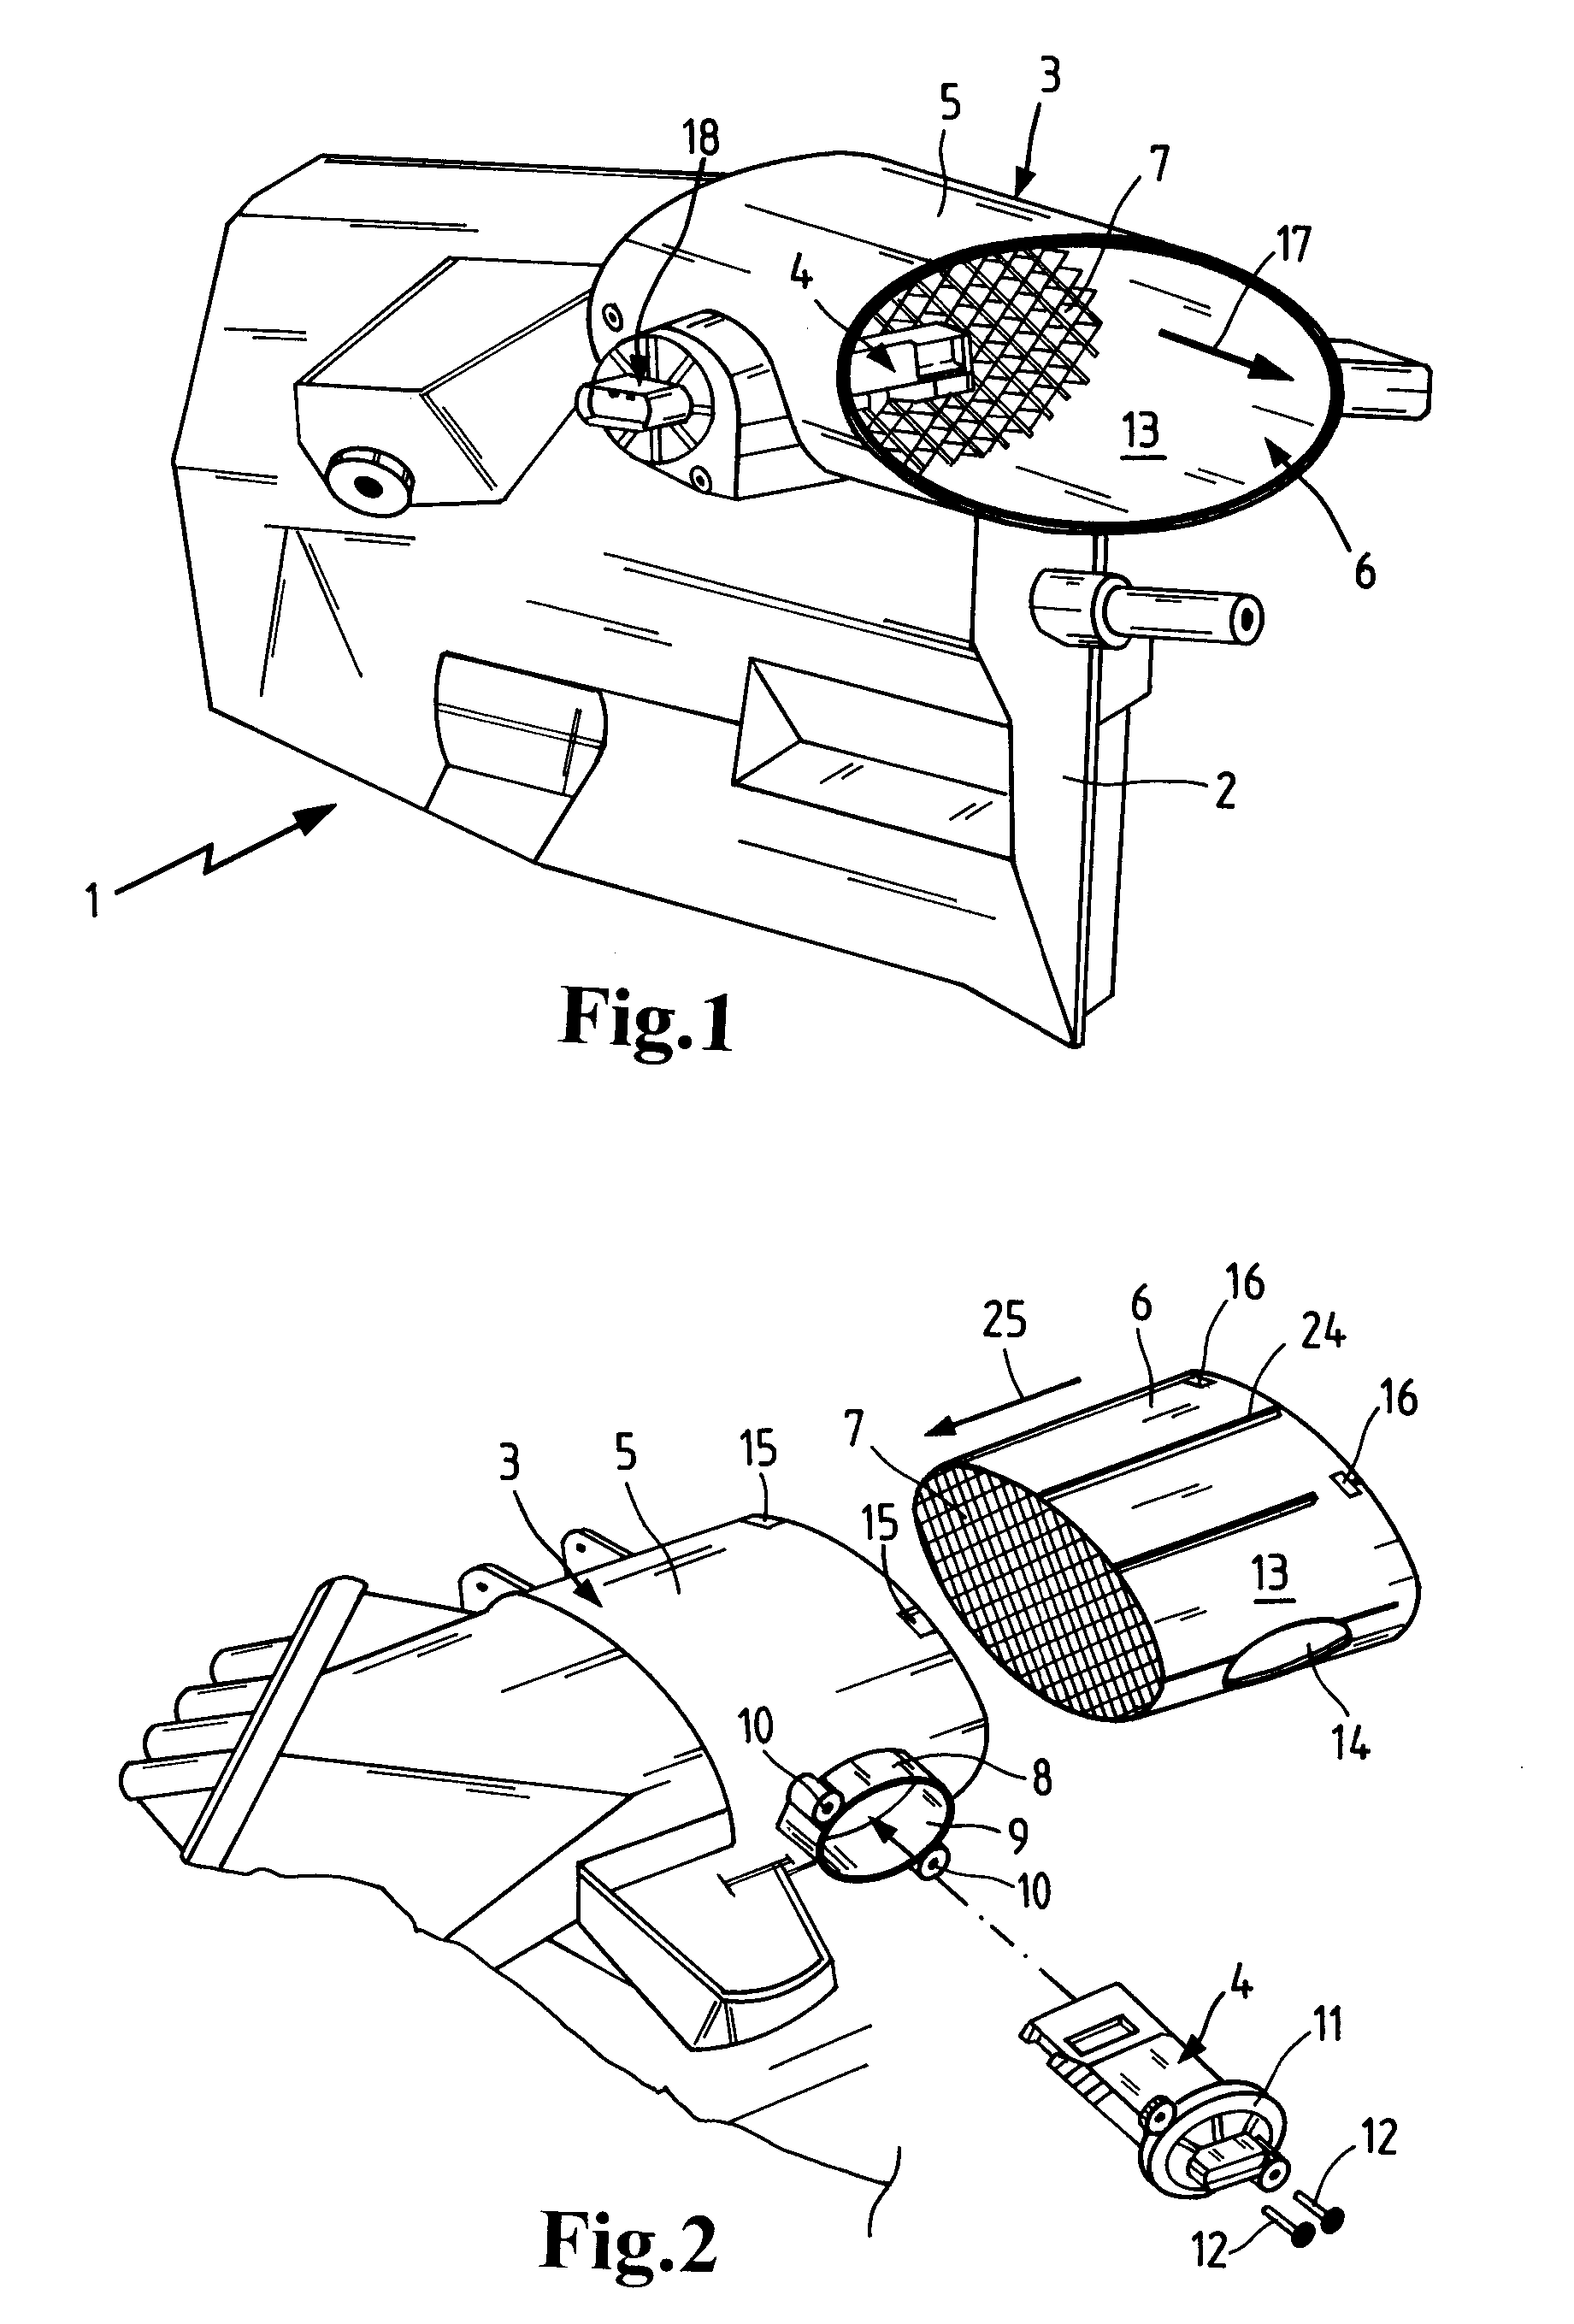 Air filter system of a motor vehicle